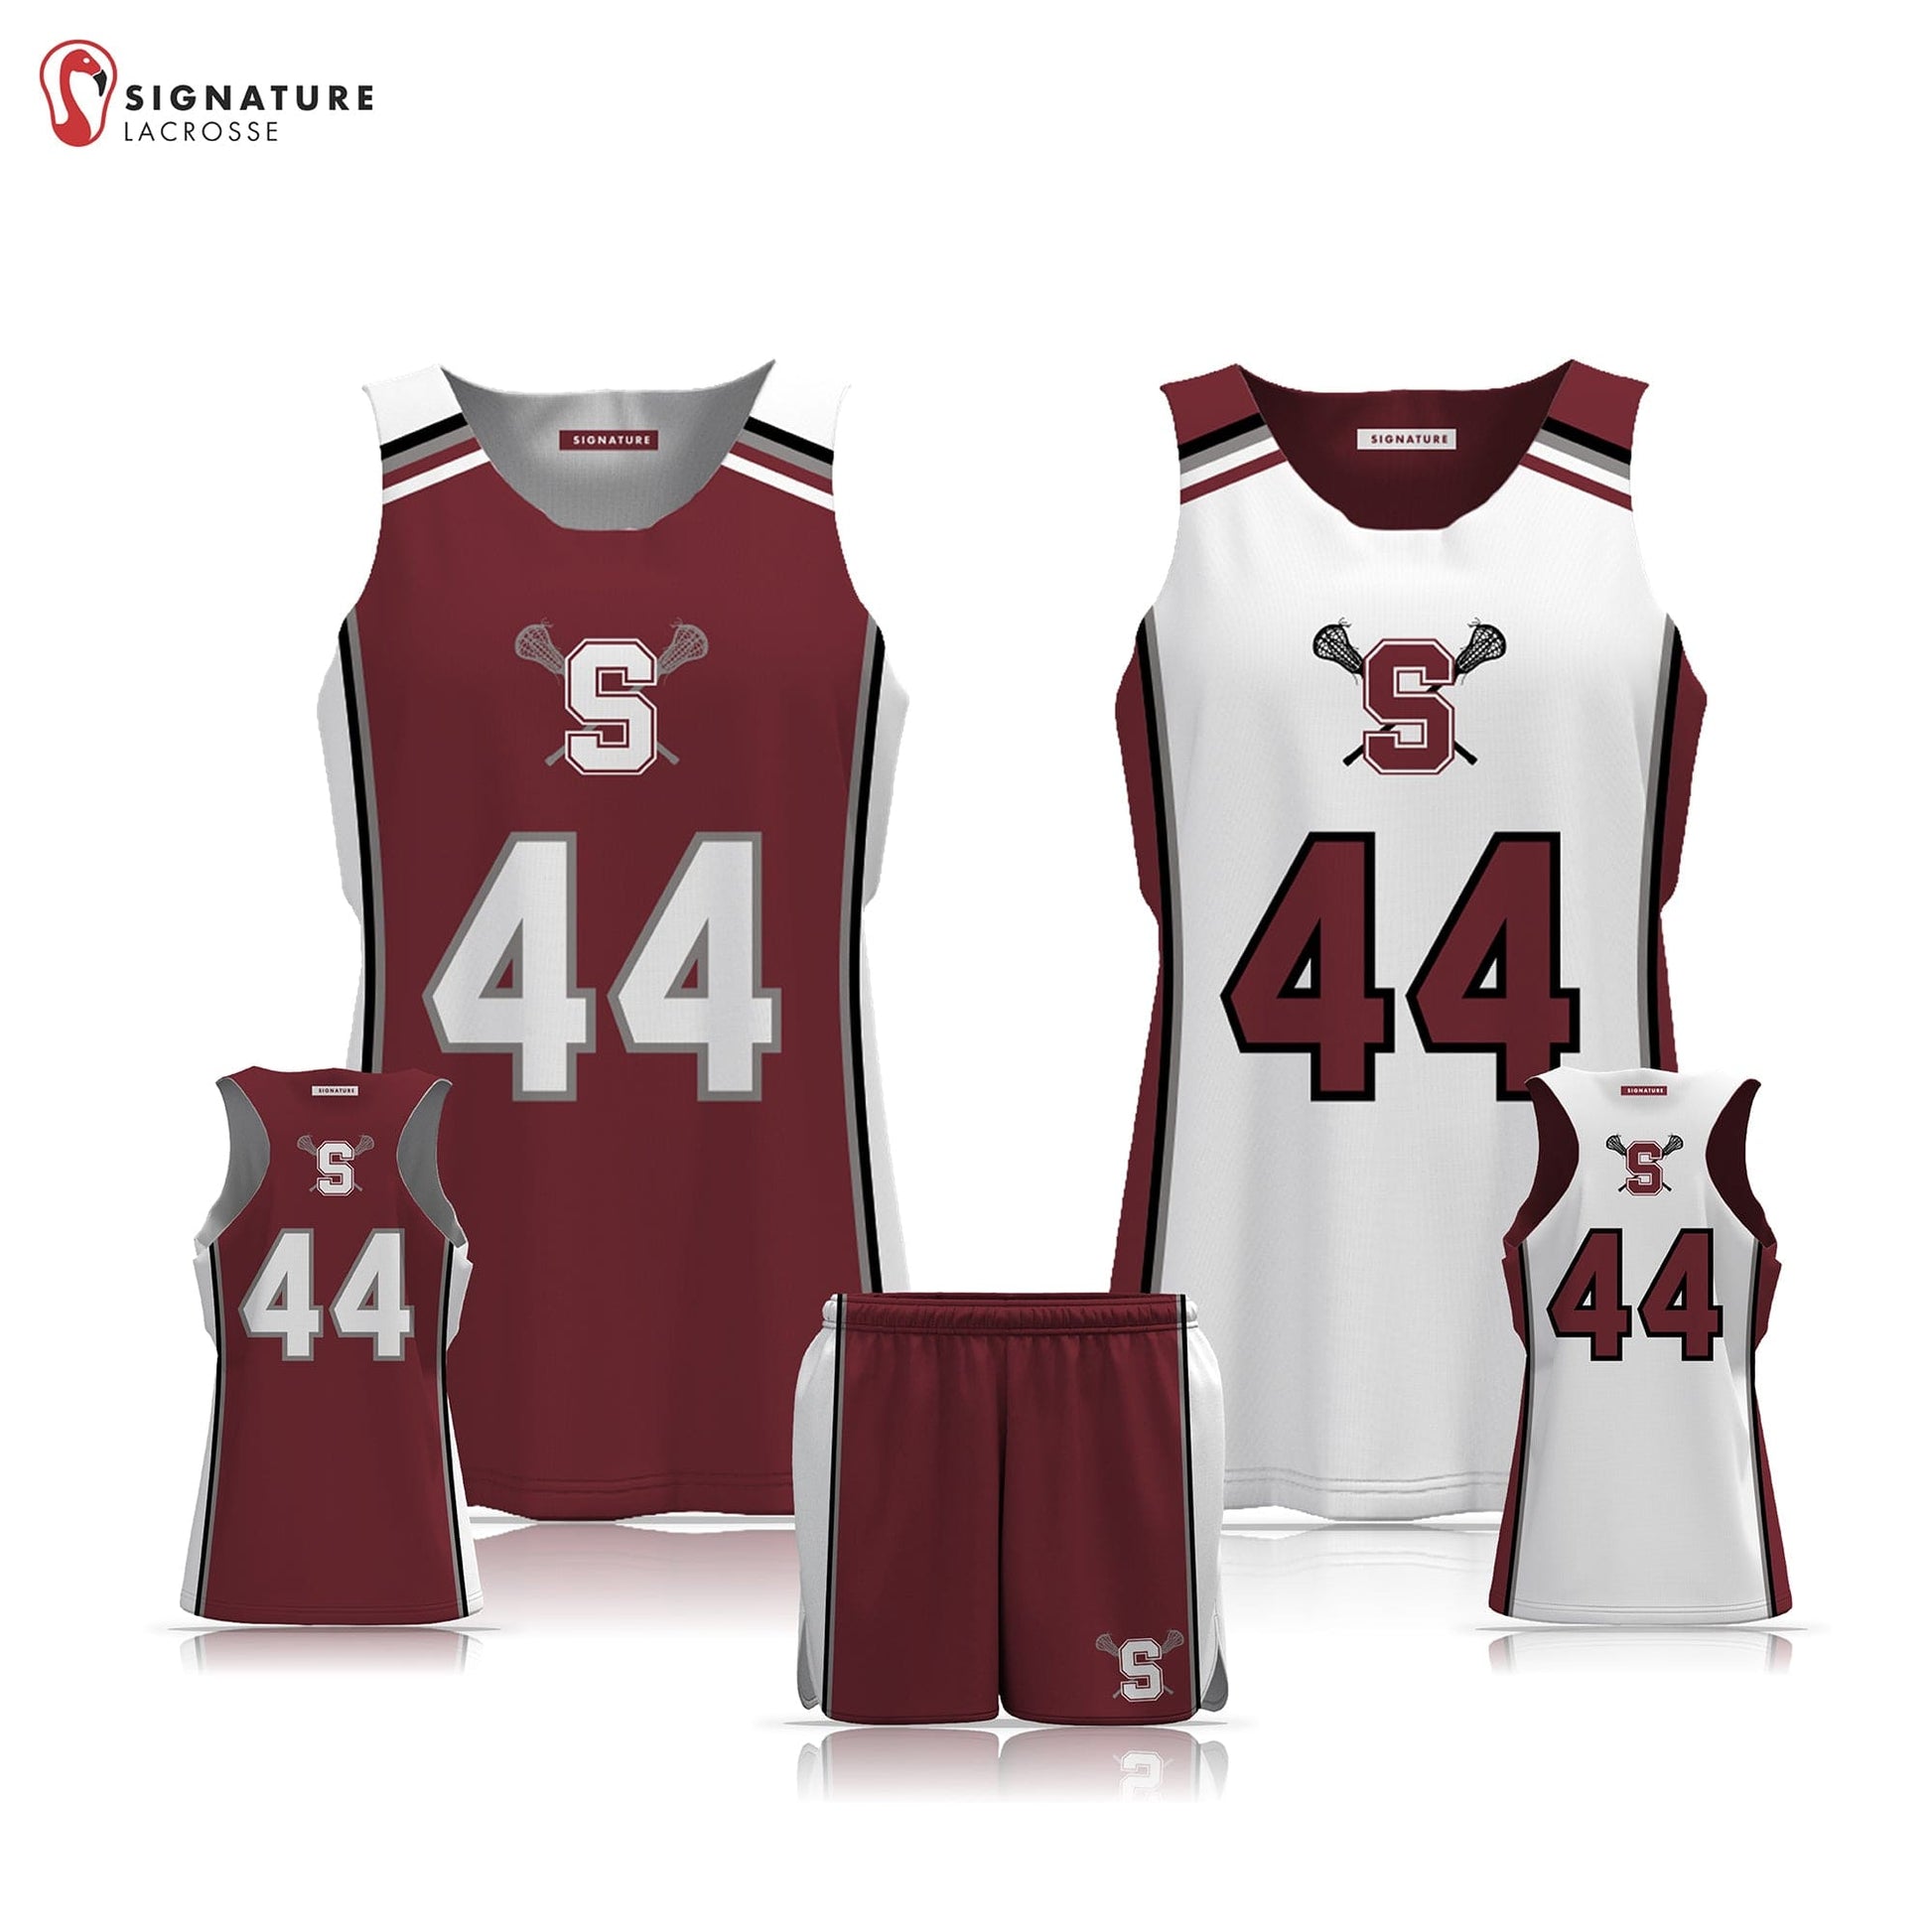 State College Women's 2 Piece Player Game Package: 3-4 Signature Lacrosse